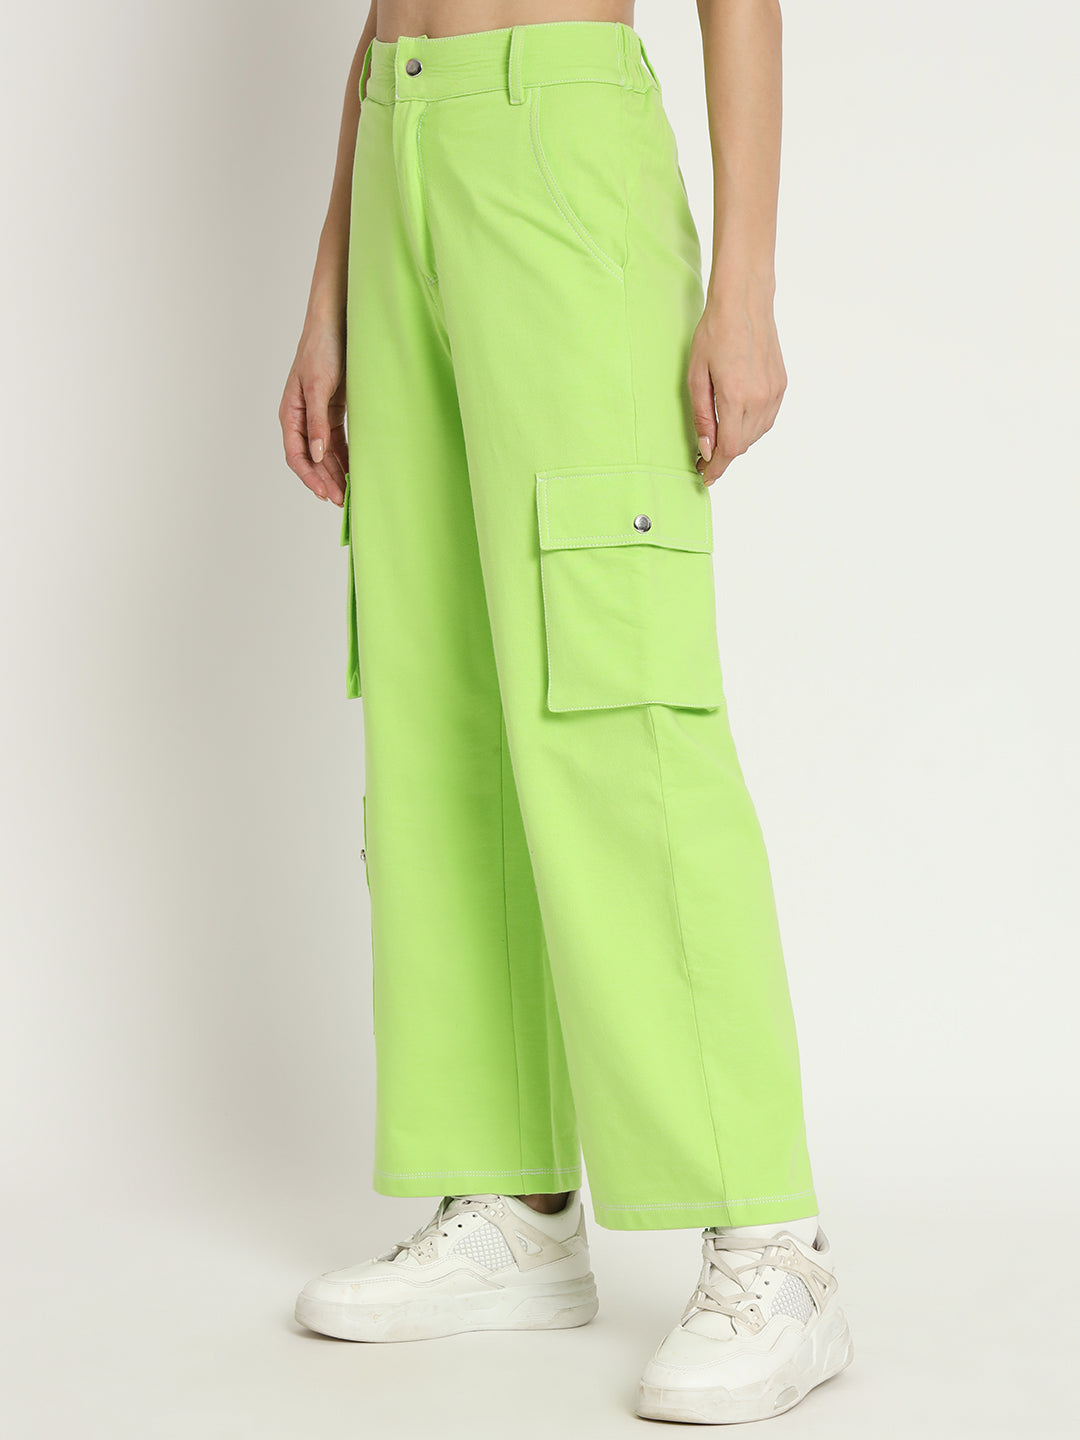 Lime Green Trousers - Buy Lime Green Trousers online in India